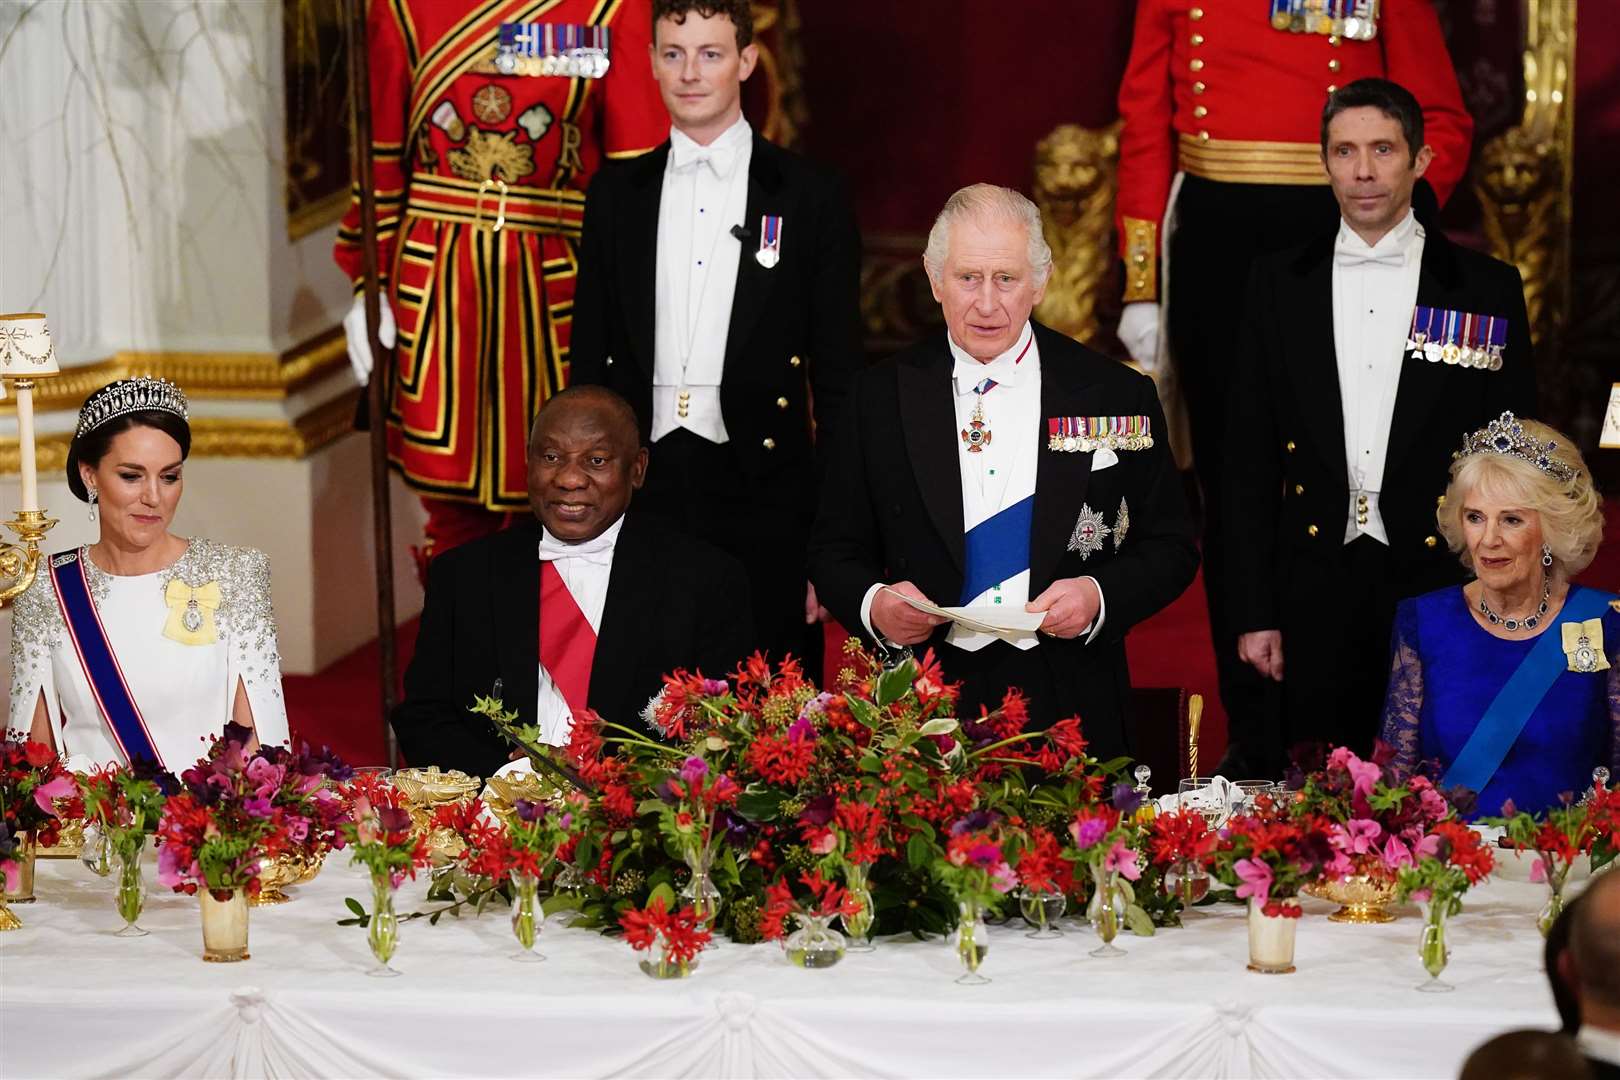 The Princess of Wales, President Cyril Ramaphosa of South Africa, and the King and Queen during a state banquet last November (Aaron Chown/PA)